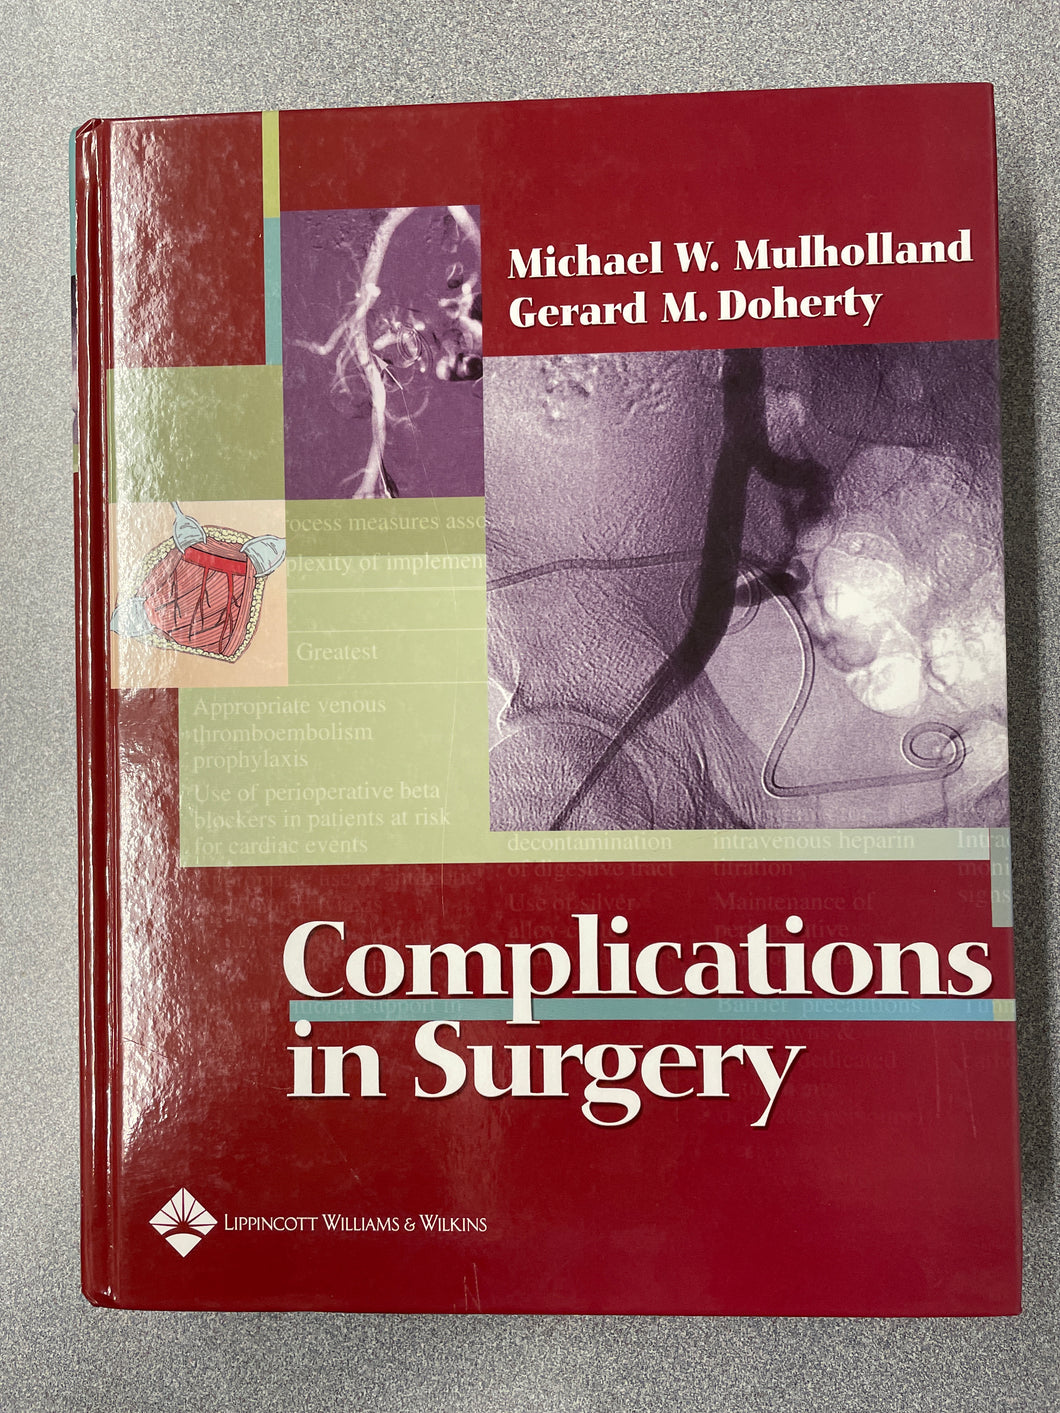 SN  Complications in Surgery, Mulholland, Michael W. and Gerard M. Doherty [2005] N 4/24